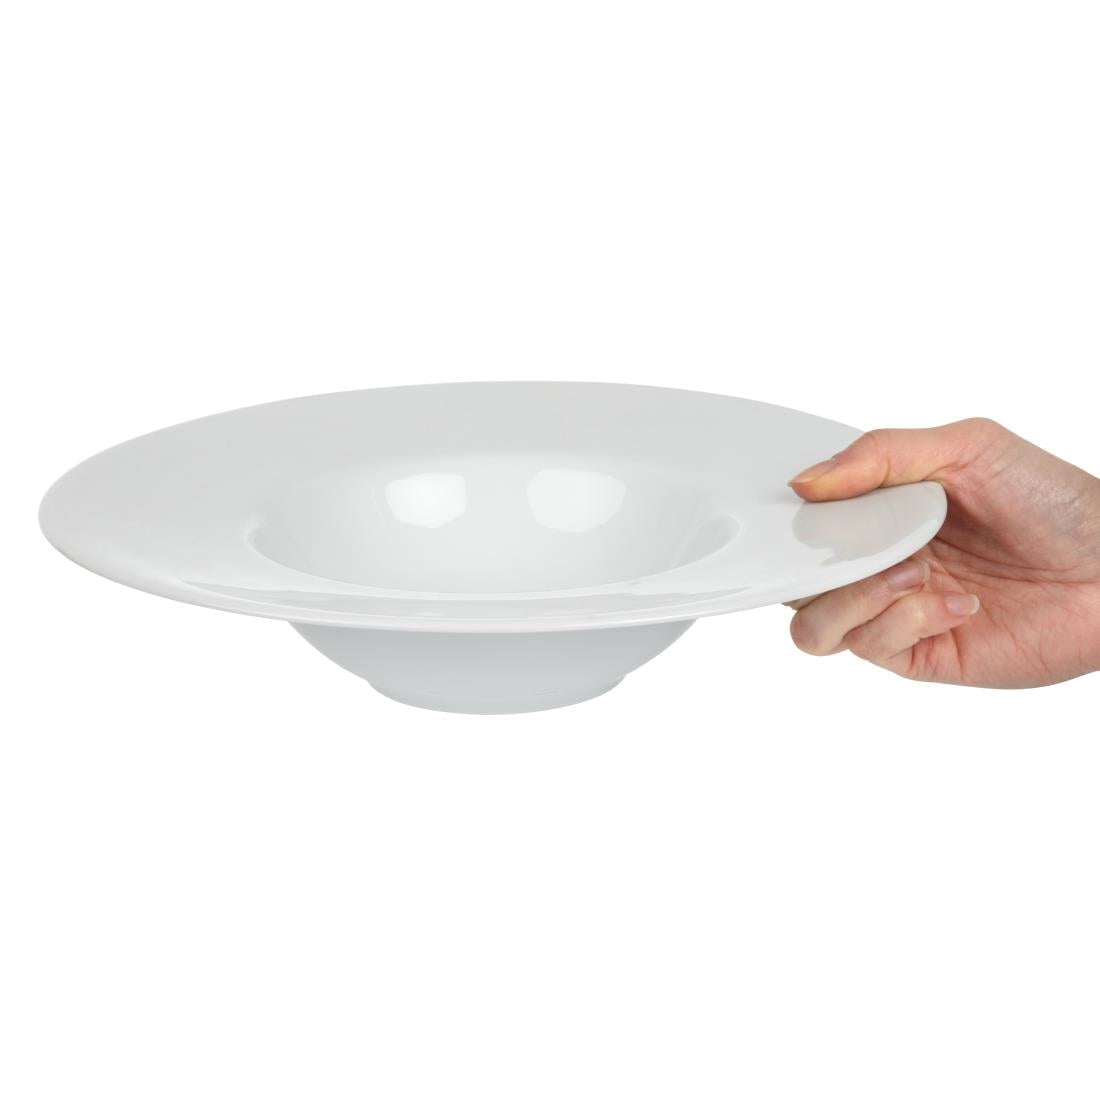 CG018 Royal Porcelain Classic White Pasta Plates 280mm (Pack of 6)